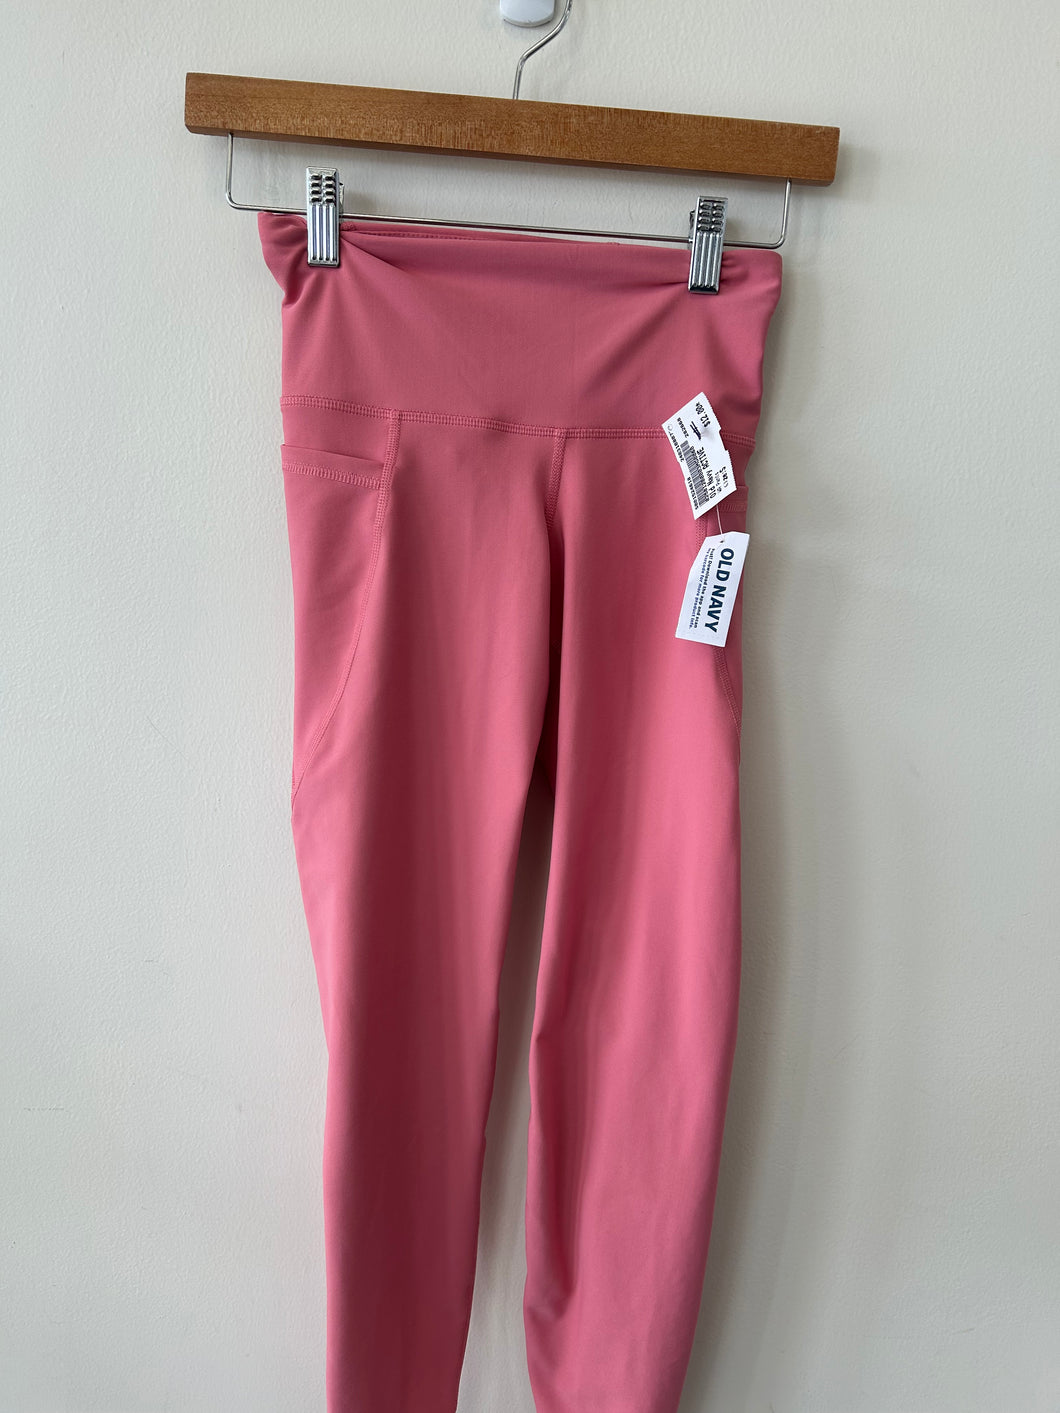 Old Navy Active Athletic Pants Size Small